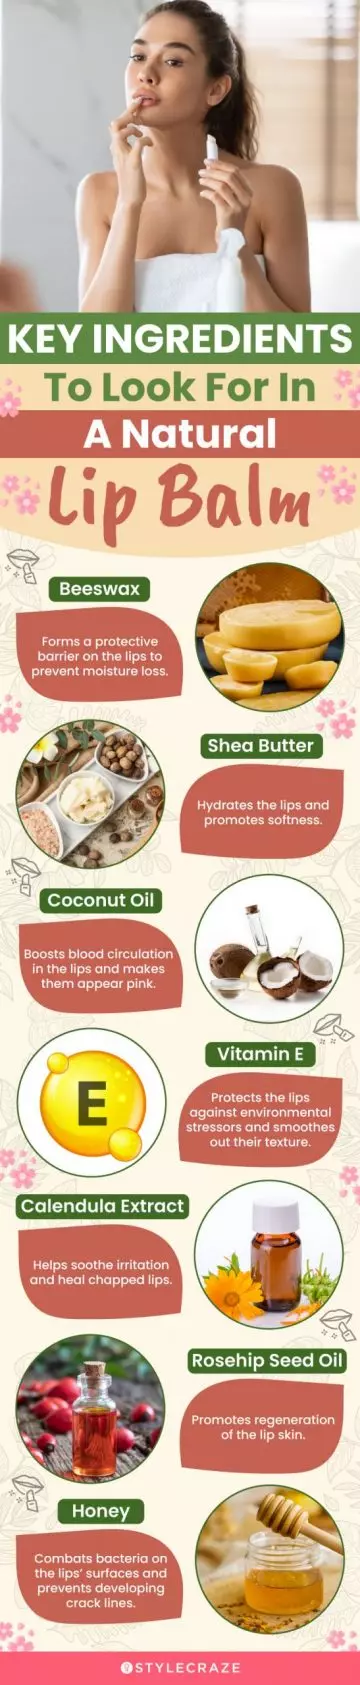 Key Ingredients To Look For In A Natural Lip Balm (infographic)